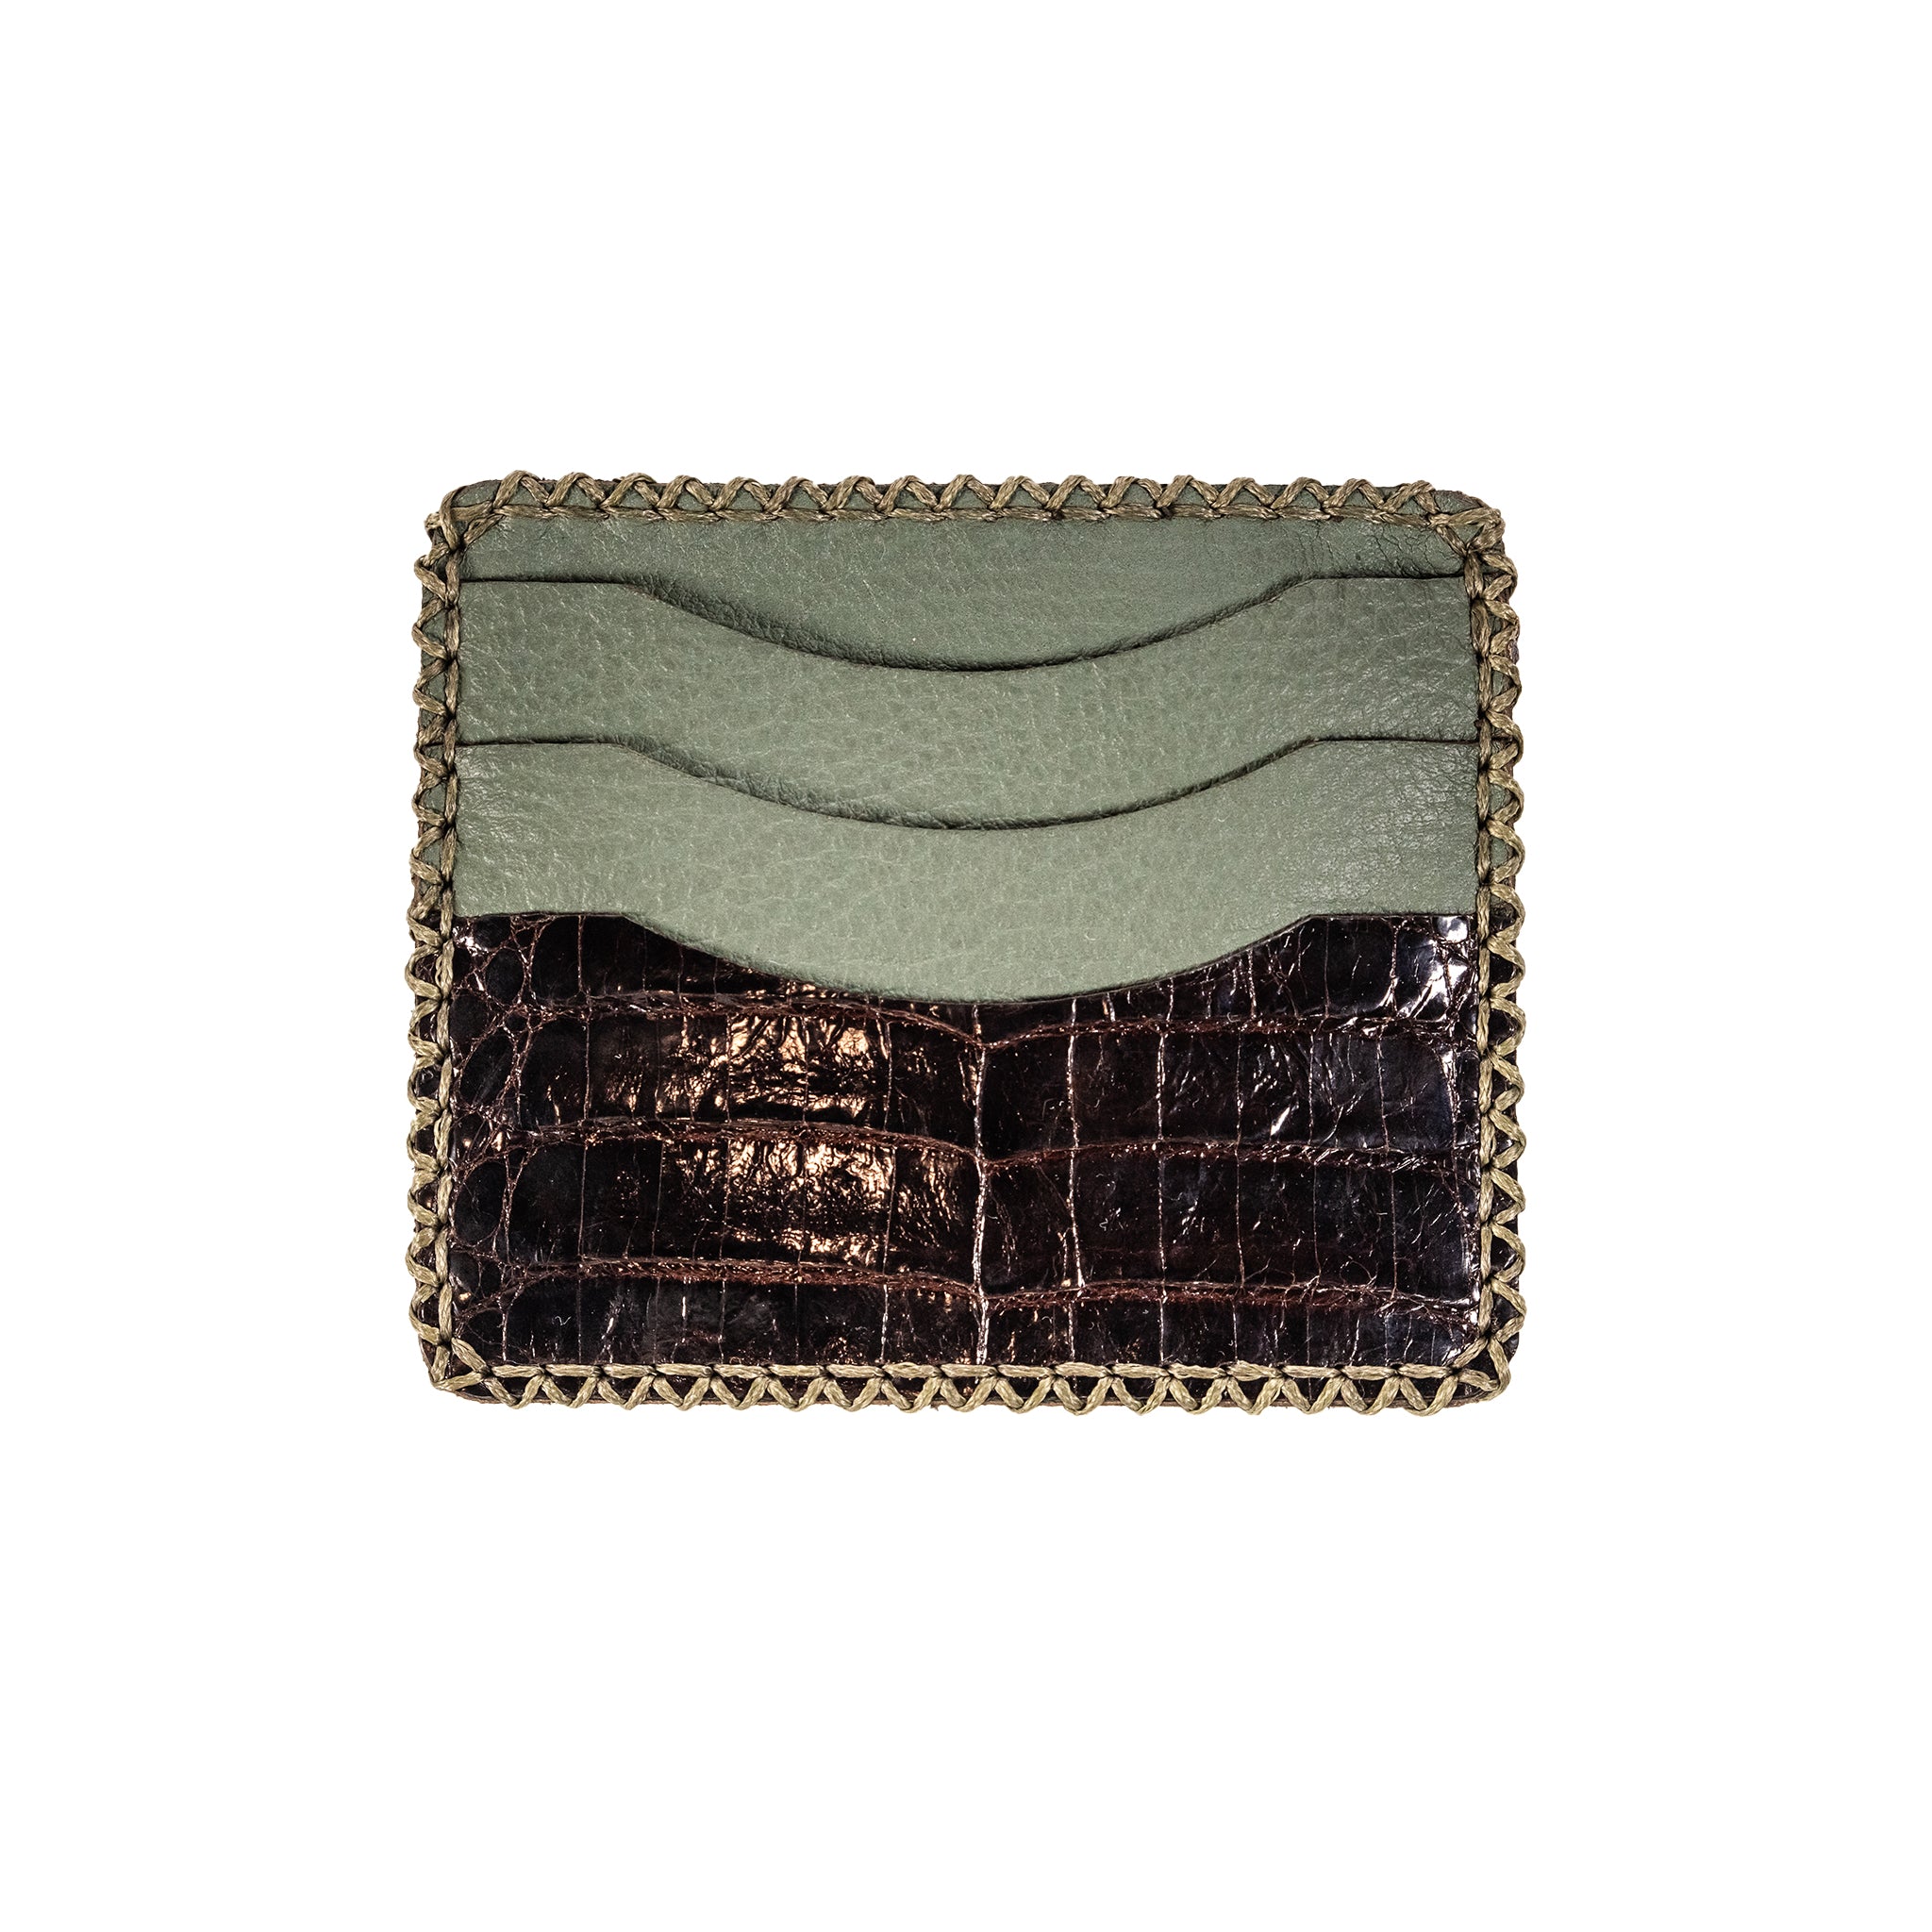 American Alligator Leather Passport Wallet – Boysterous Couture